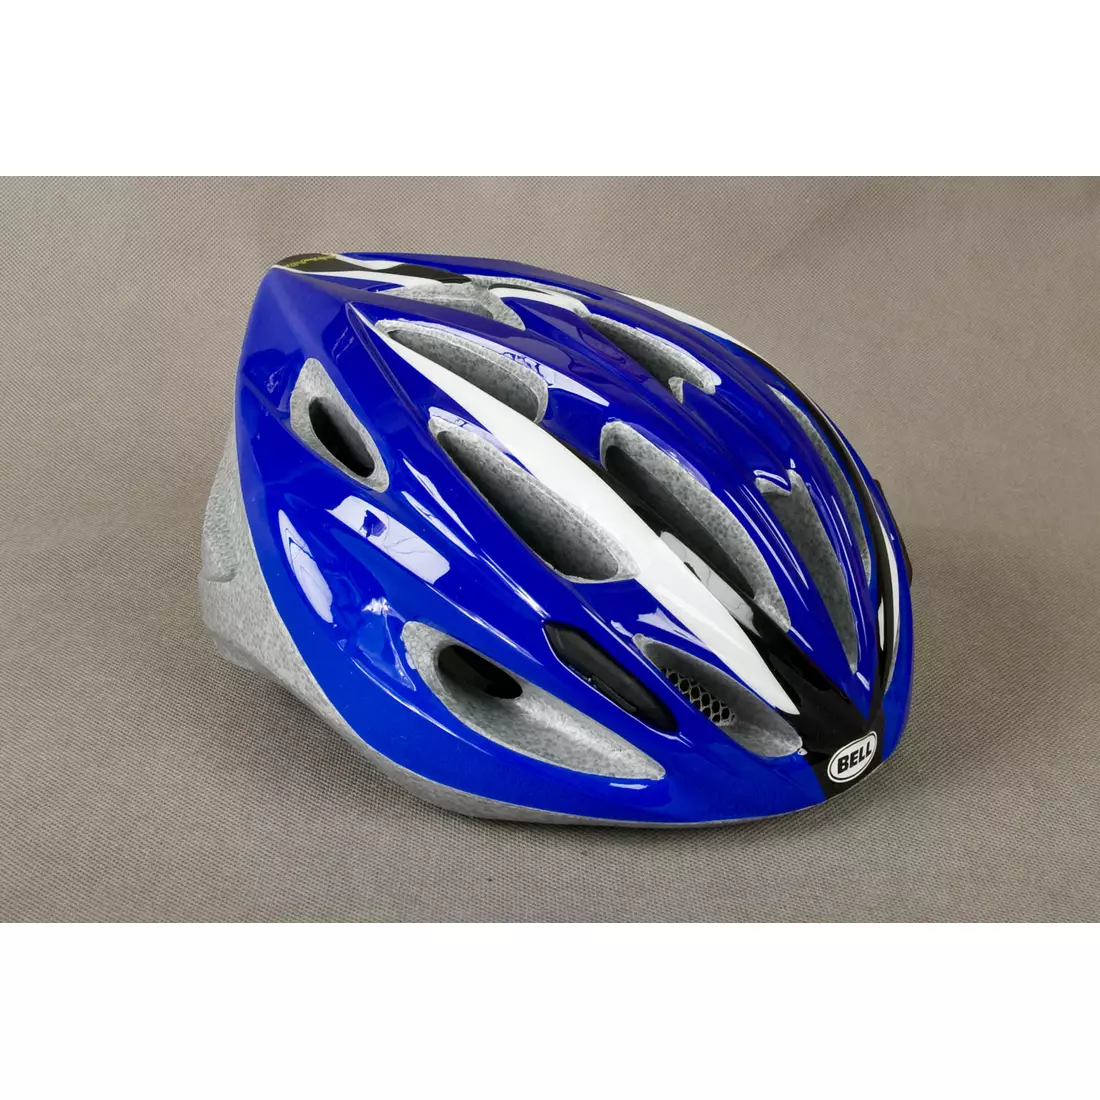 BELL kask rowerowy SOLAR white blue